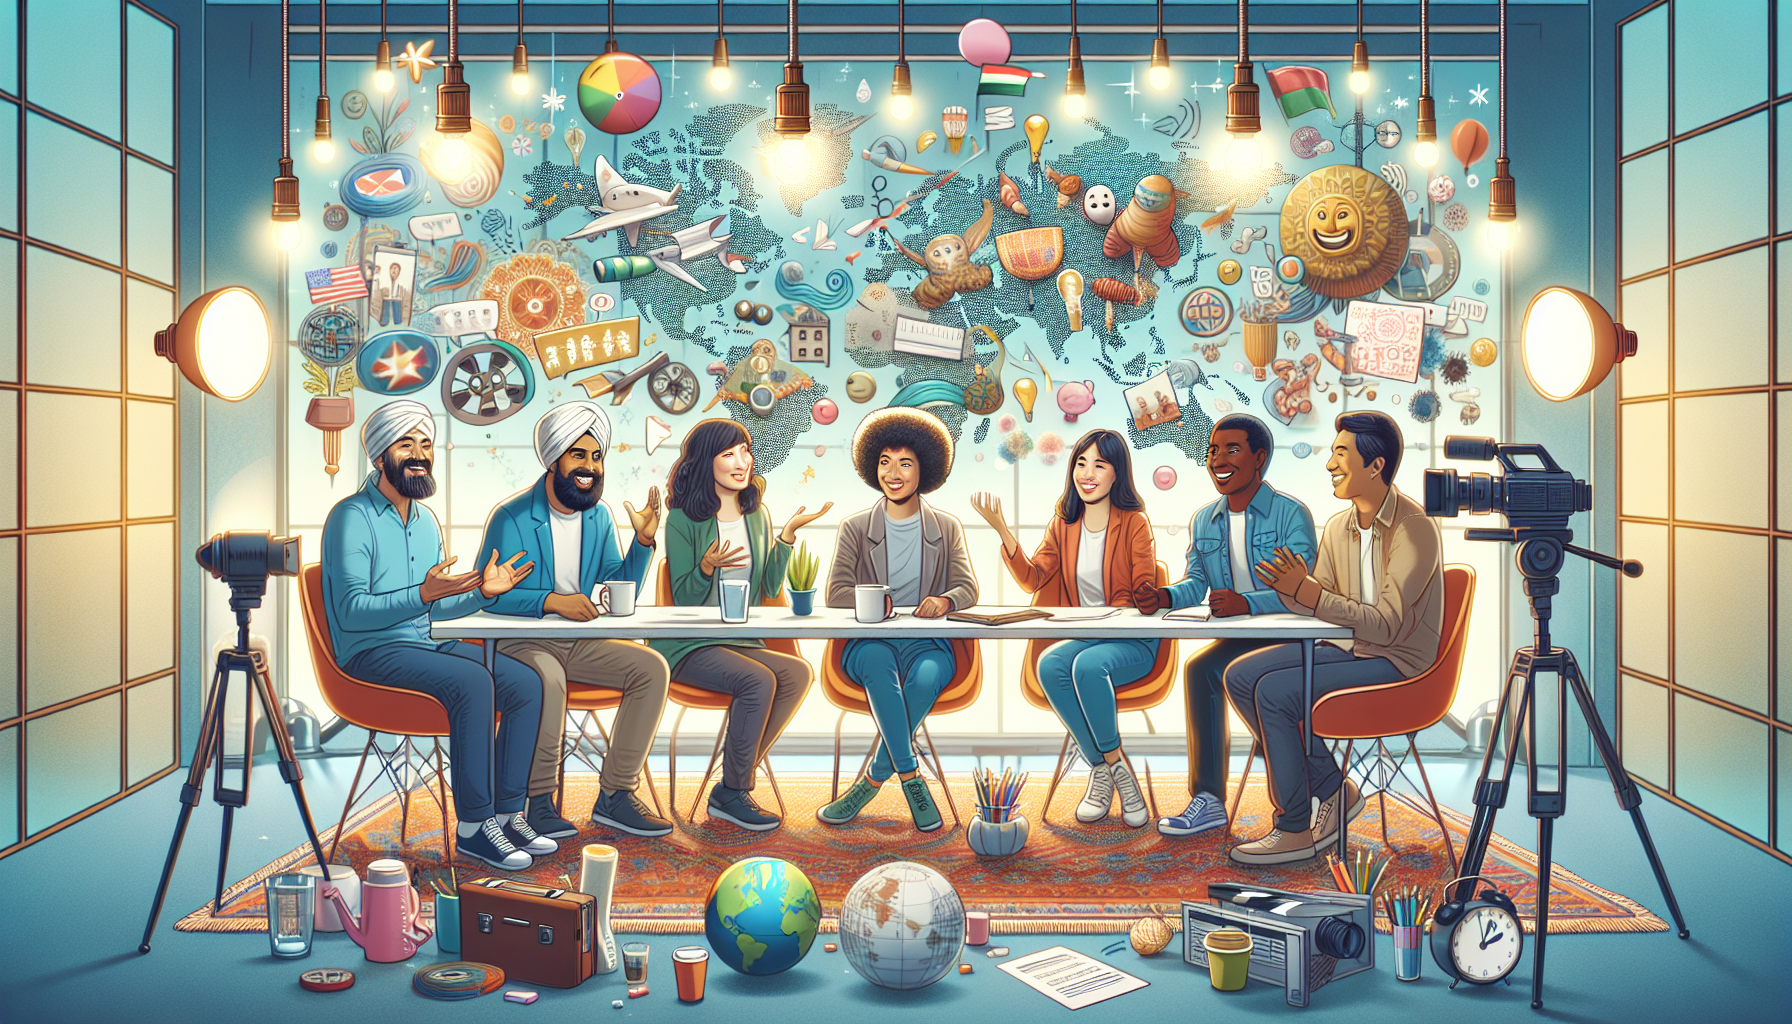 A colorful roundtable discussion with diverse filmmakers from different countries, each sharing ideas and scripts for comedy films, represented by visible cultural symbols and humorous elements, in a